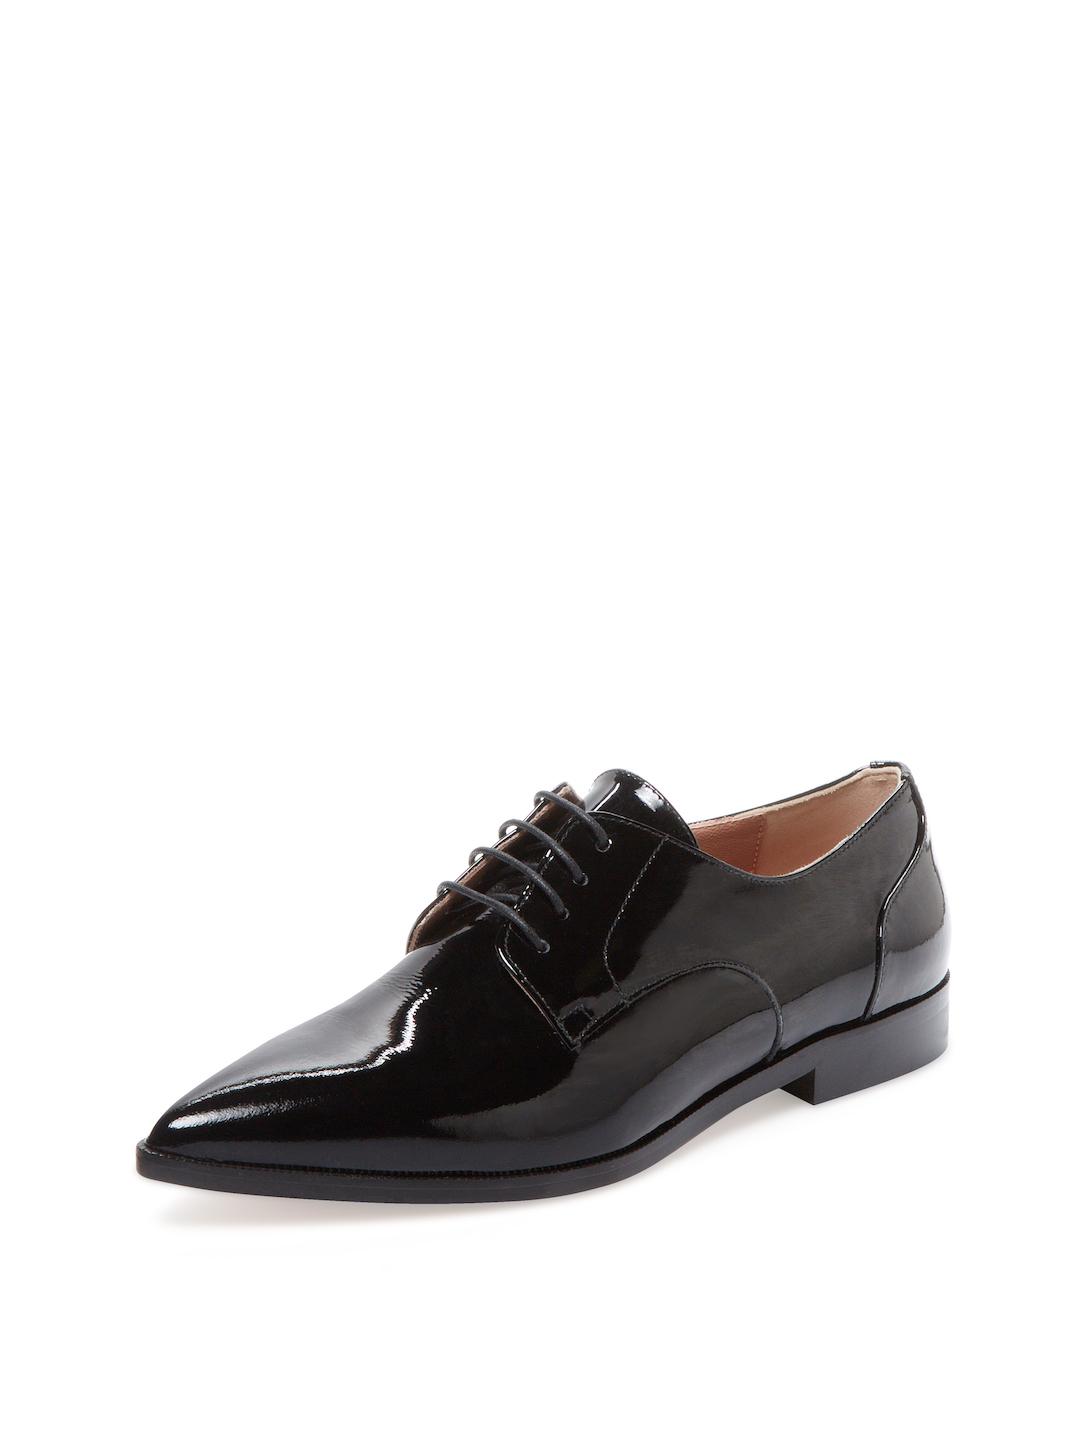 RED Valentino Bicolor Patent Leather Oxford in Black for Men - Lyst